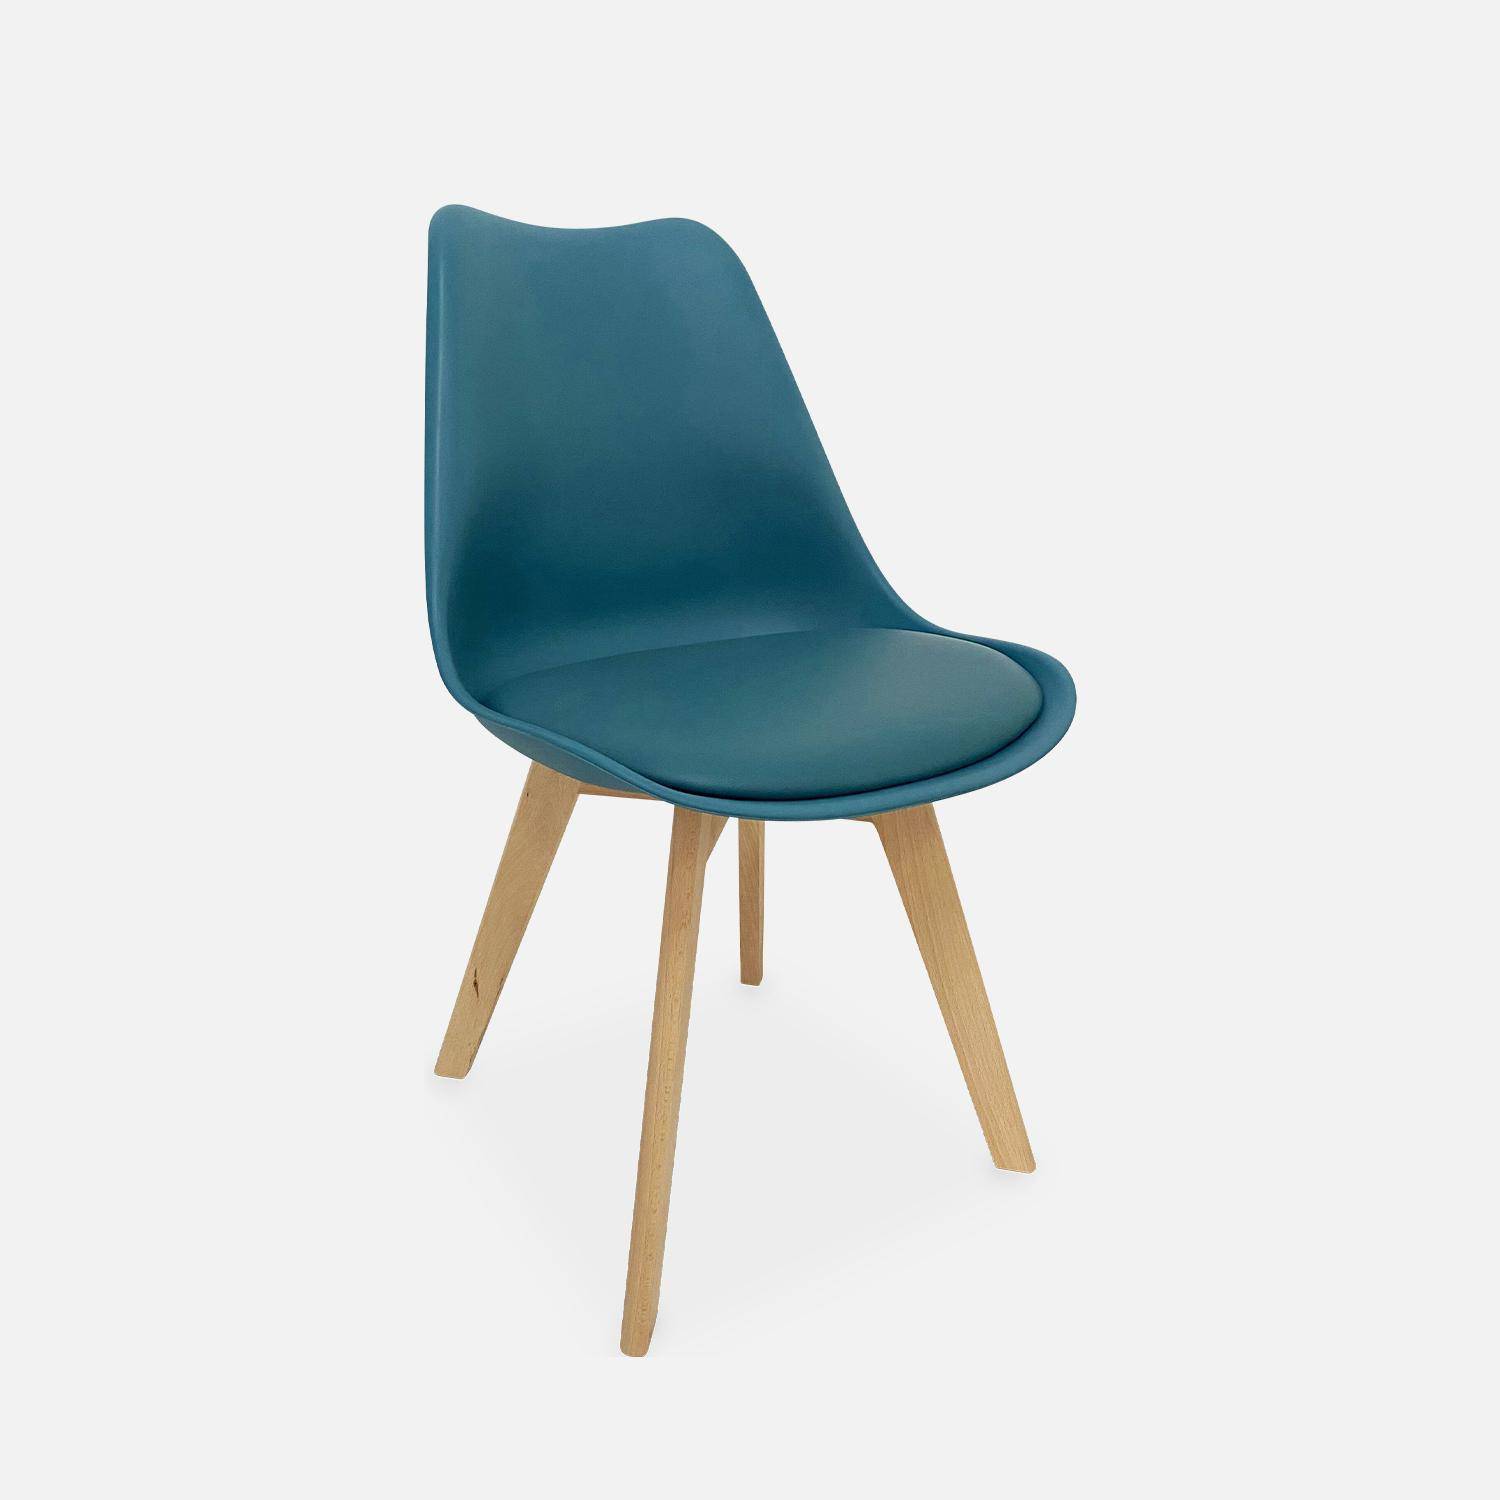 Pair of scandi-style faux-leather dining chair, blue, L49 x D55 x H81cm, NILS Photo2